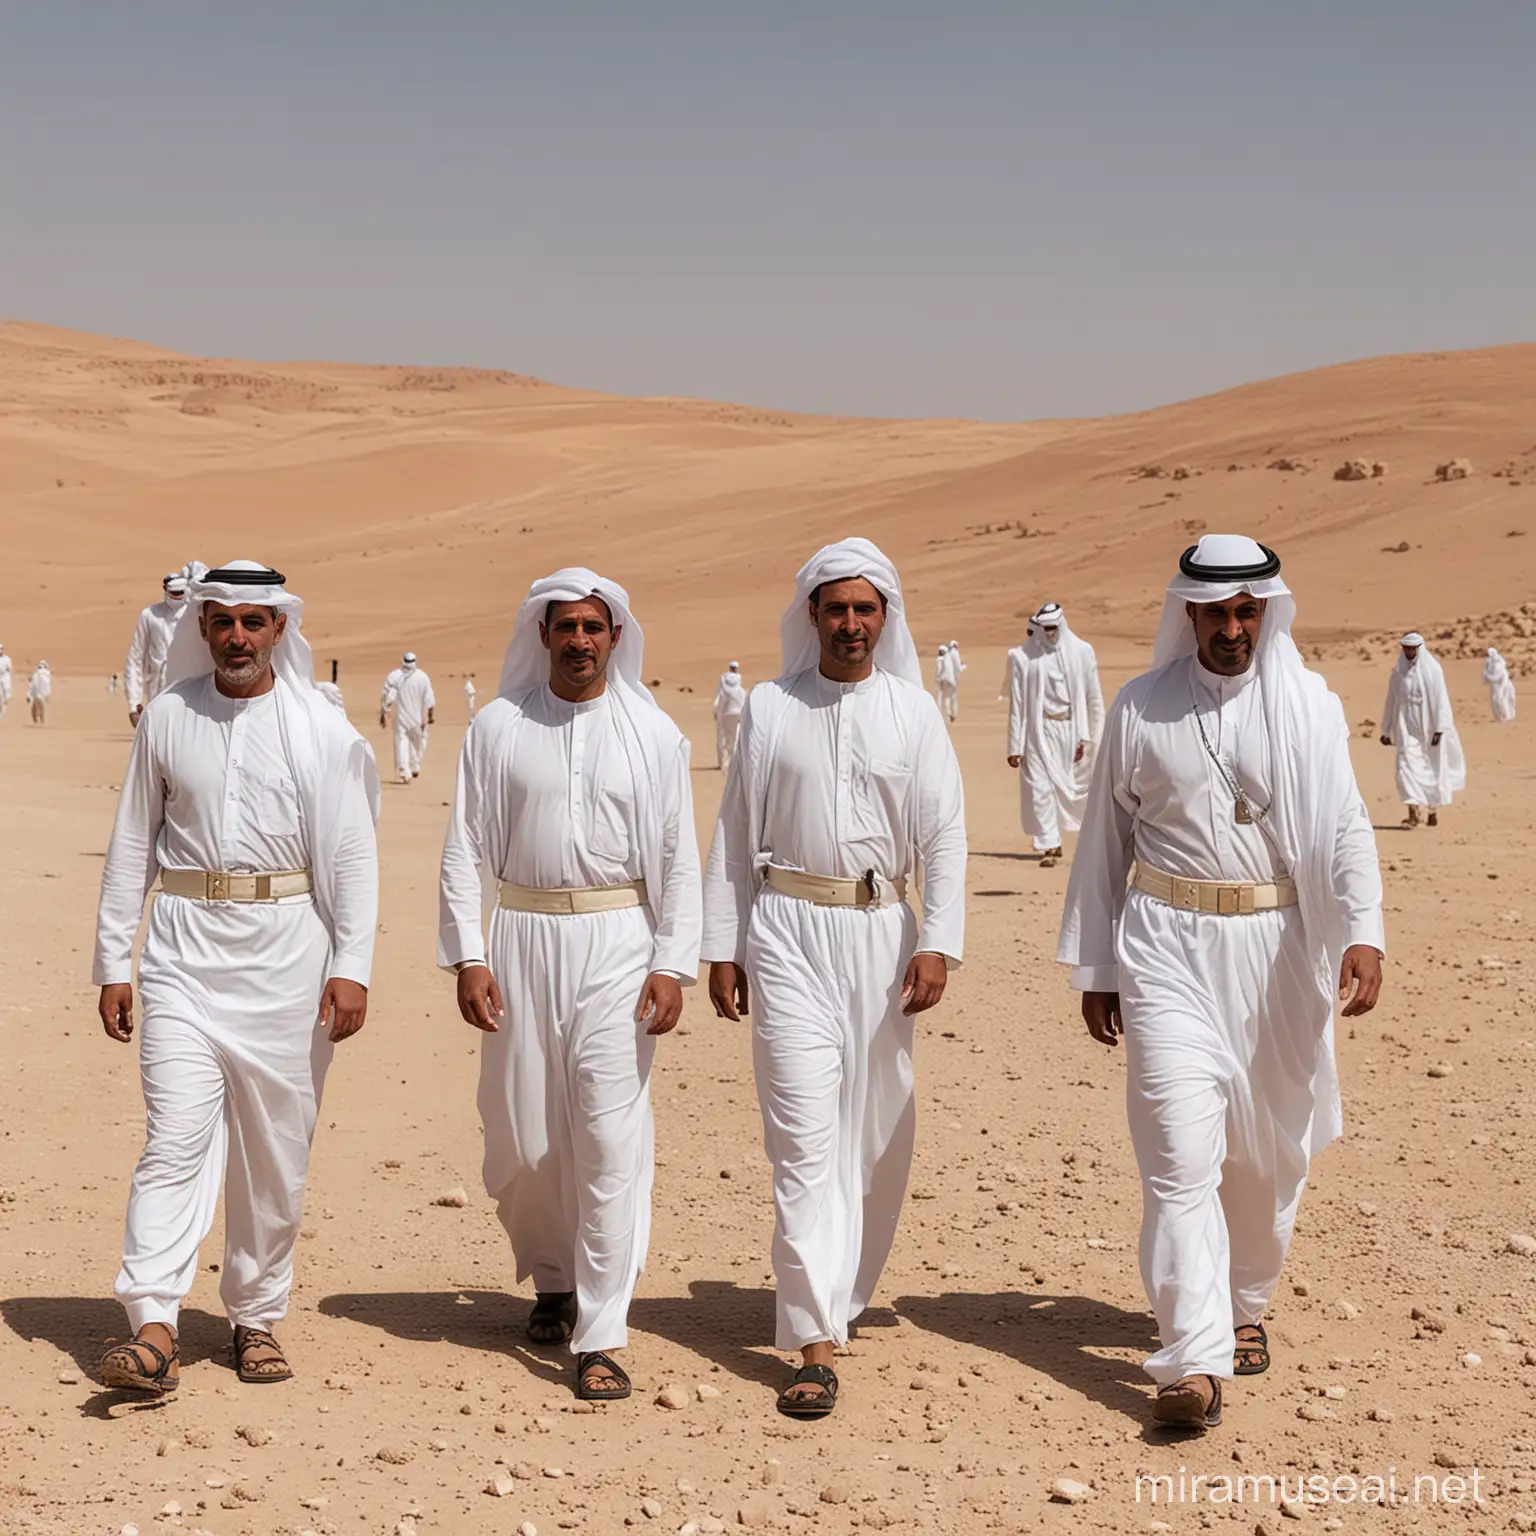 amman's men wearing white in the desert from front view